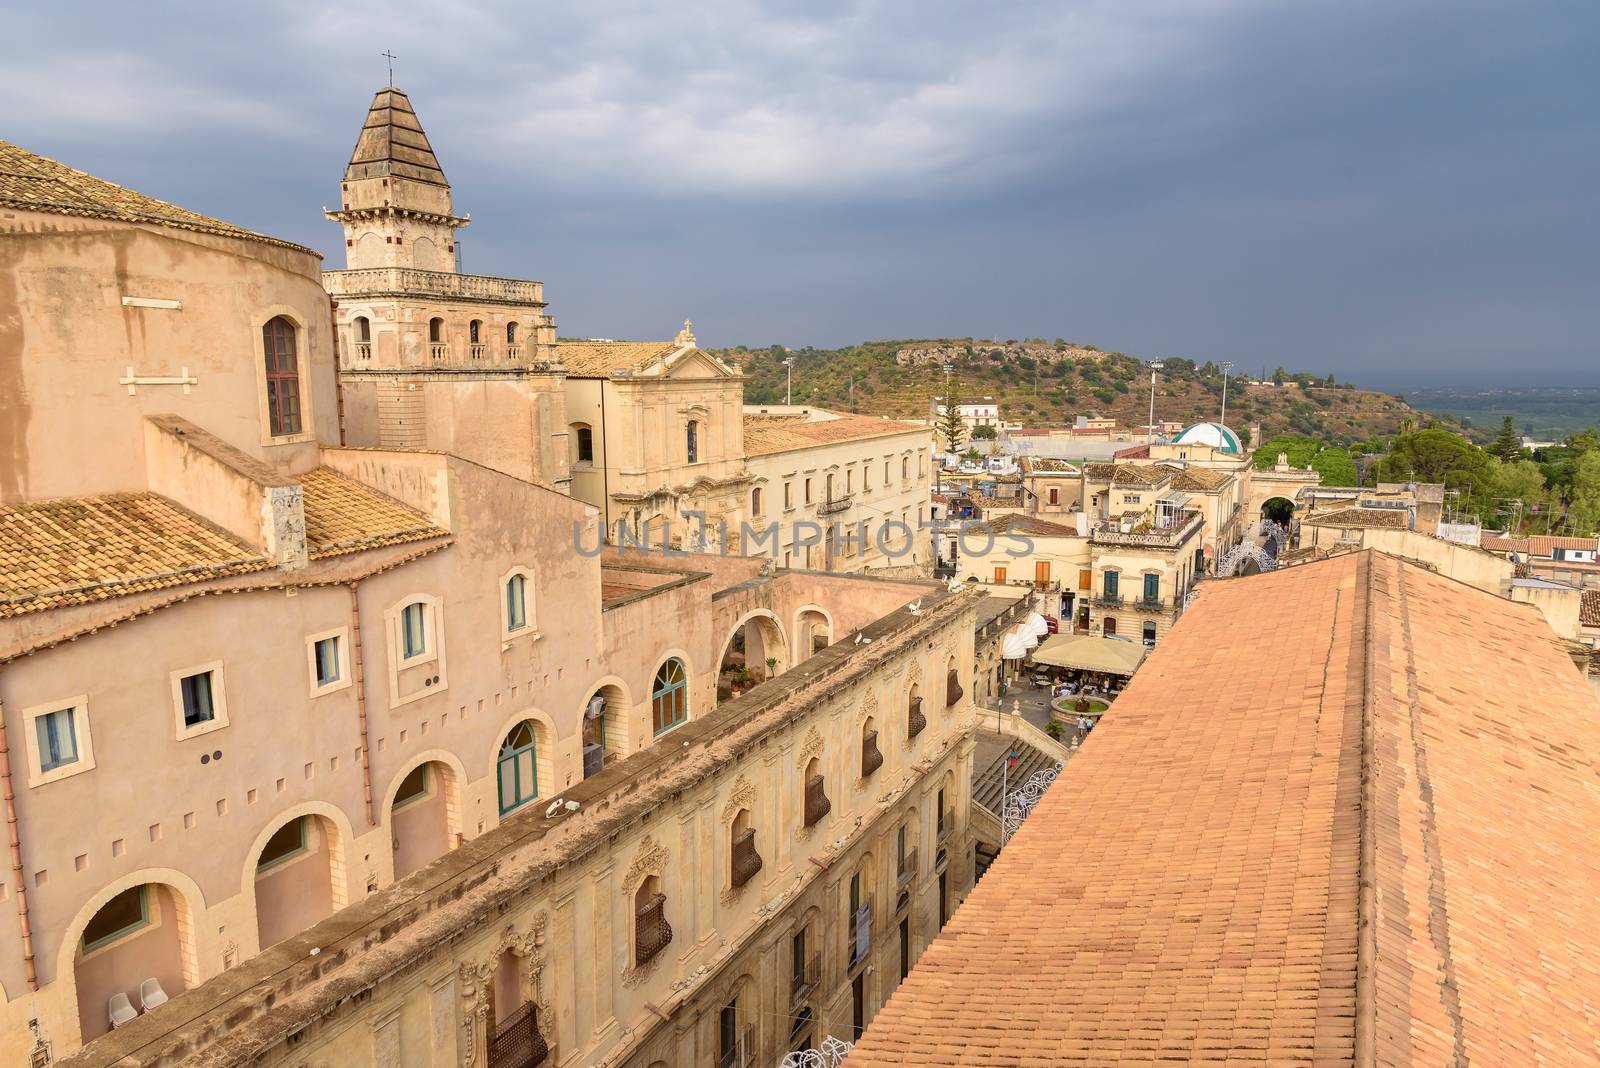 Aerial view of Noto town, Sicily, Italy